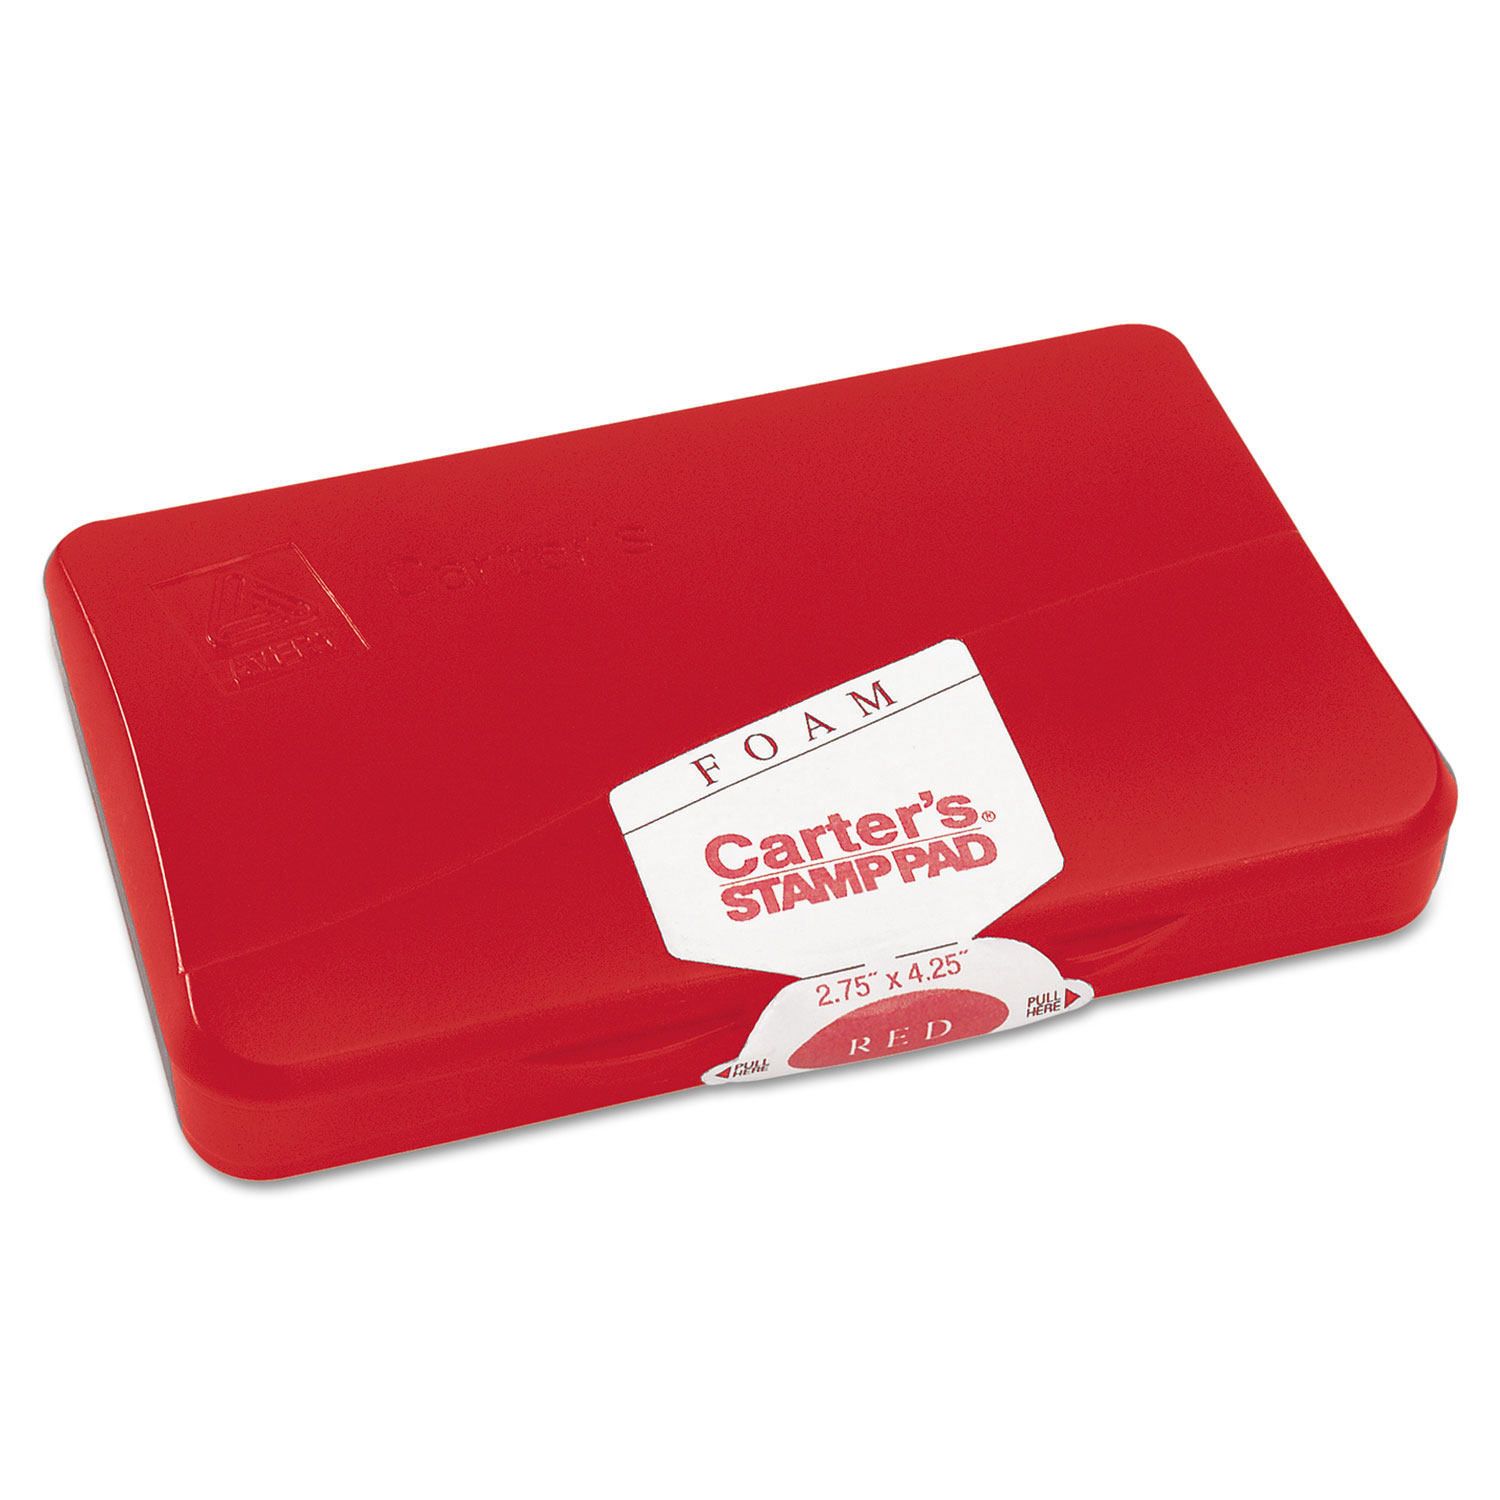  Carter's 21371 Foam Stamp Pad, 4 1/4 x 2 3/4, Red (AVE21371) 